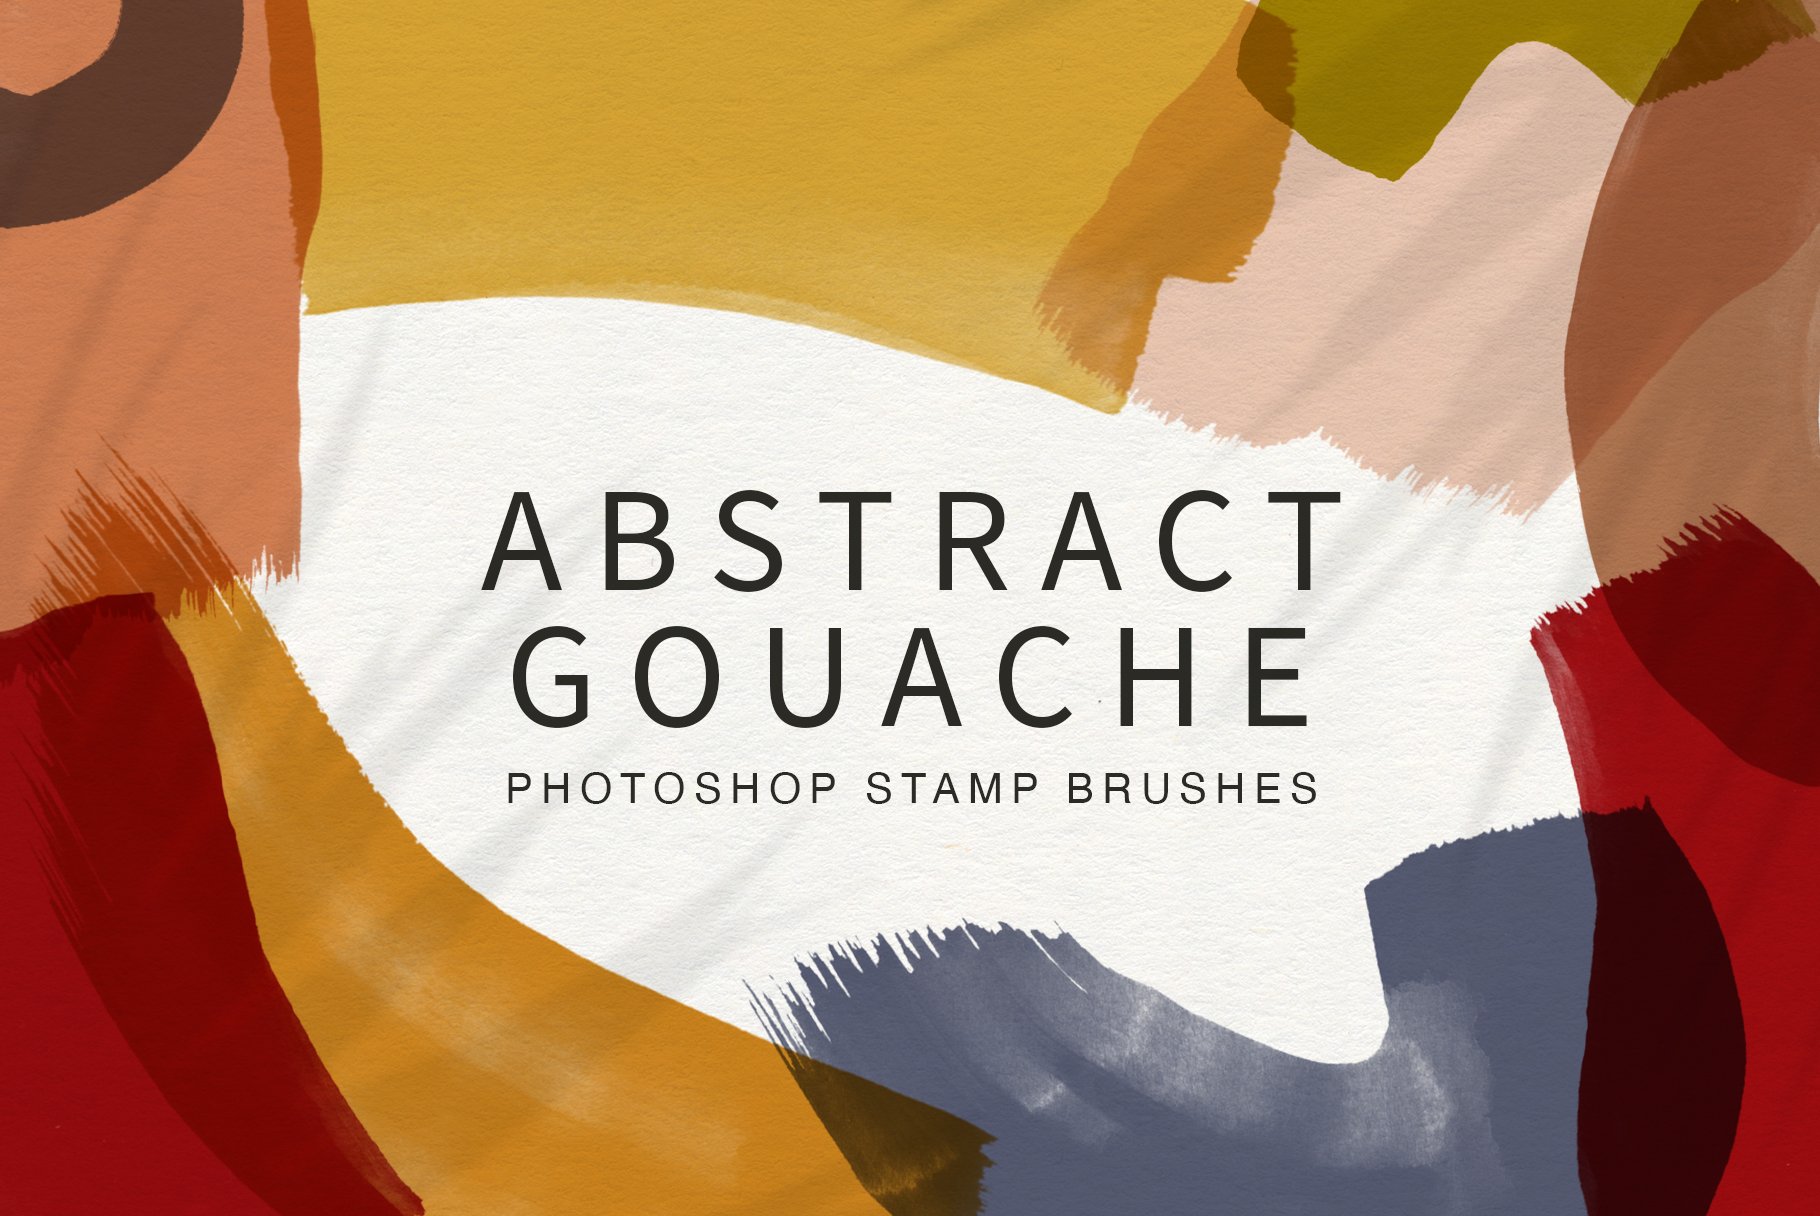 Abstract Gouache Stamp Brushescover image.